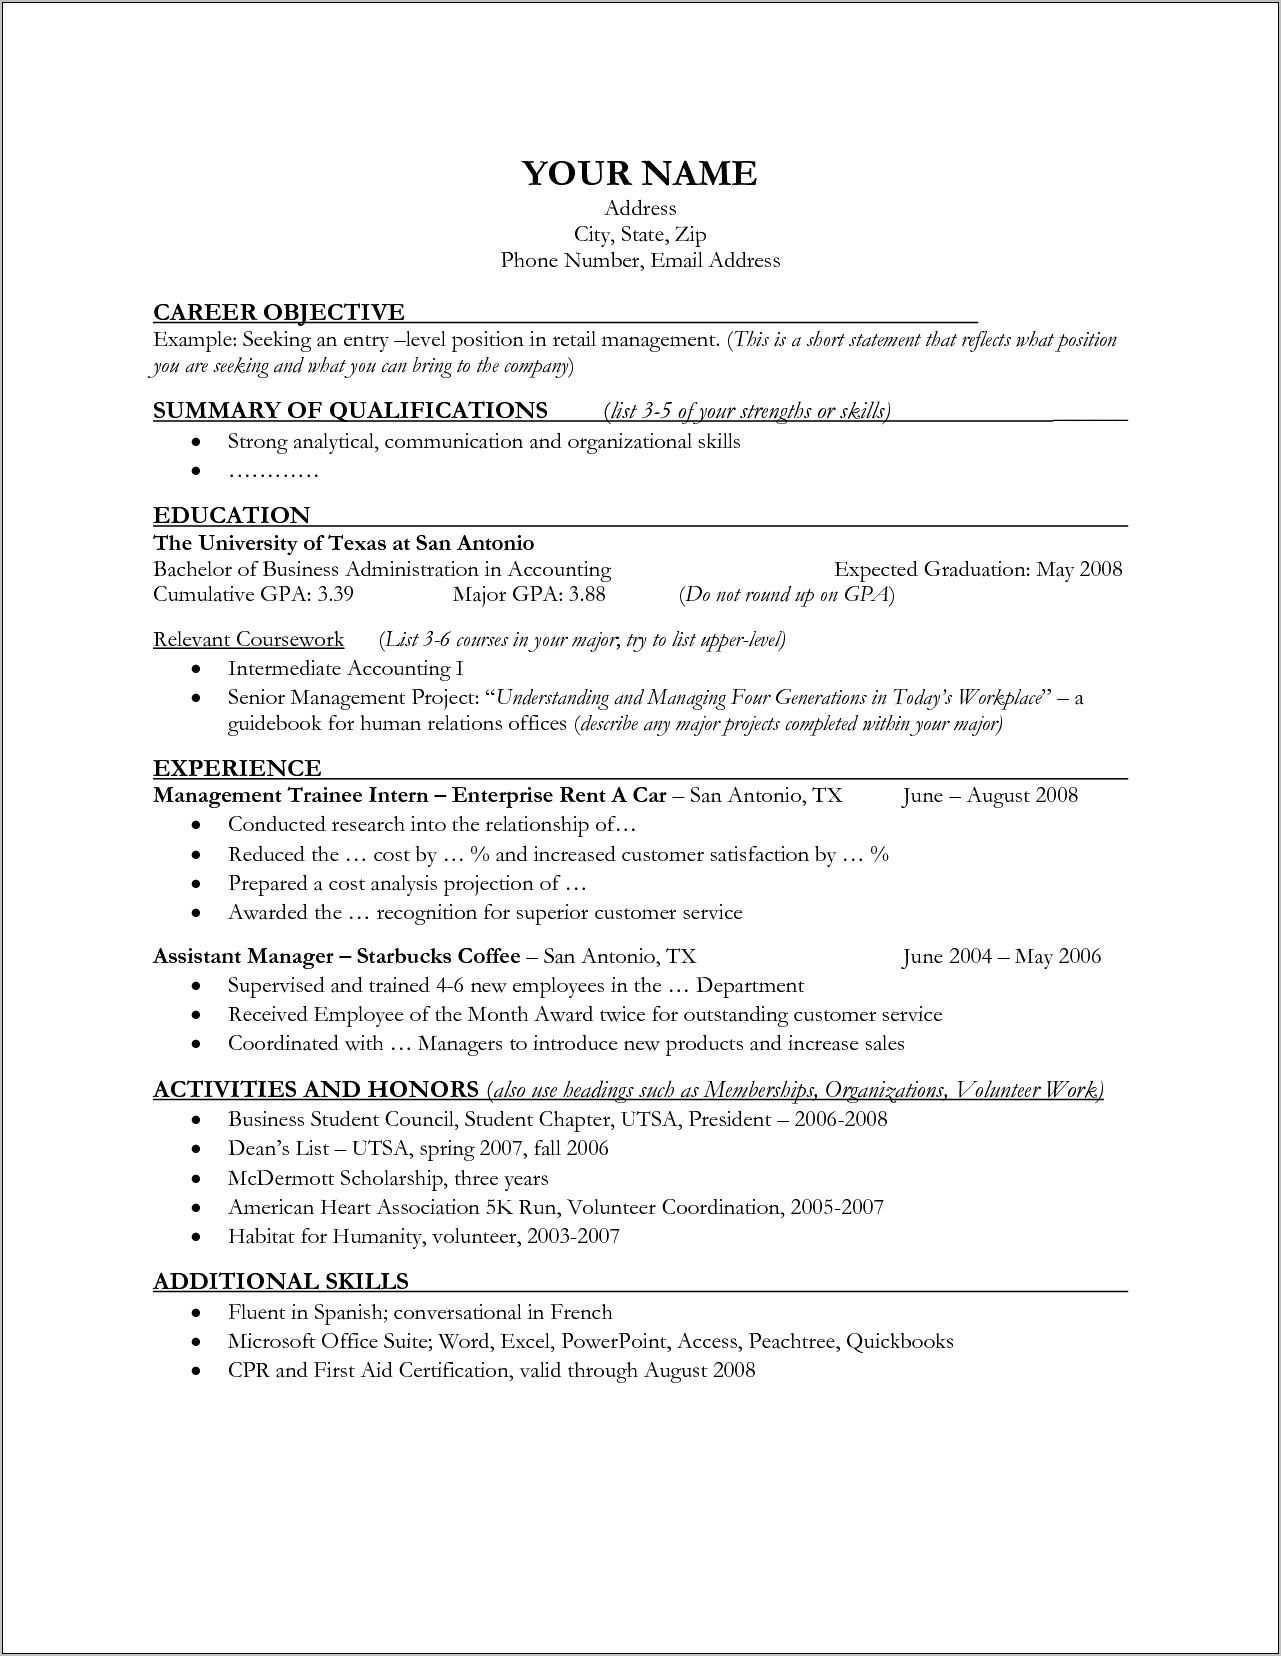 Resume Objective For Convenience Store Manager